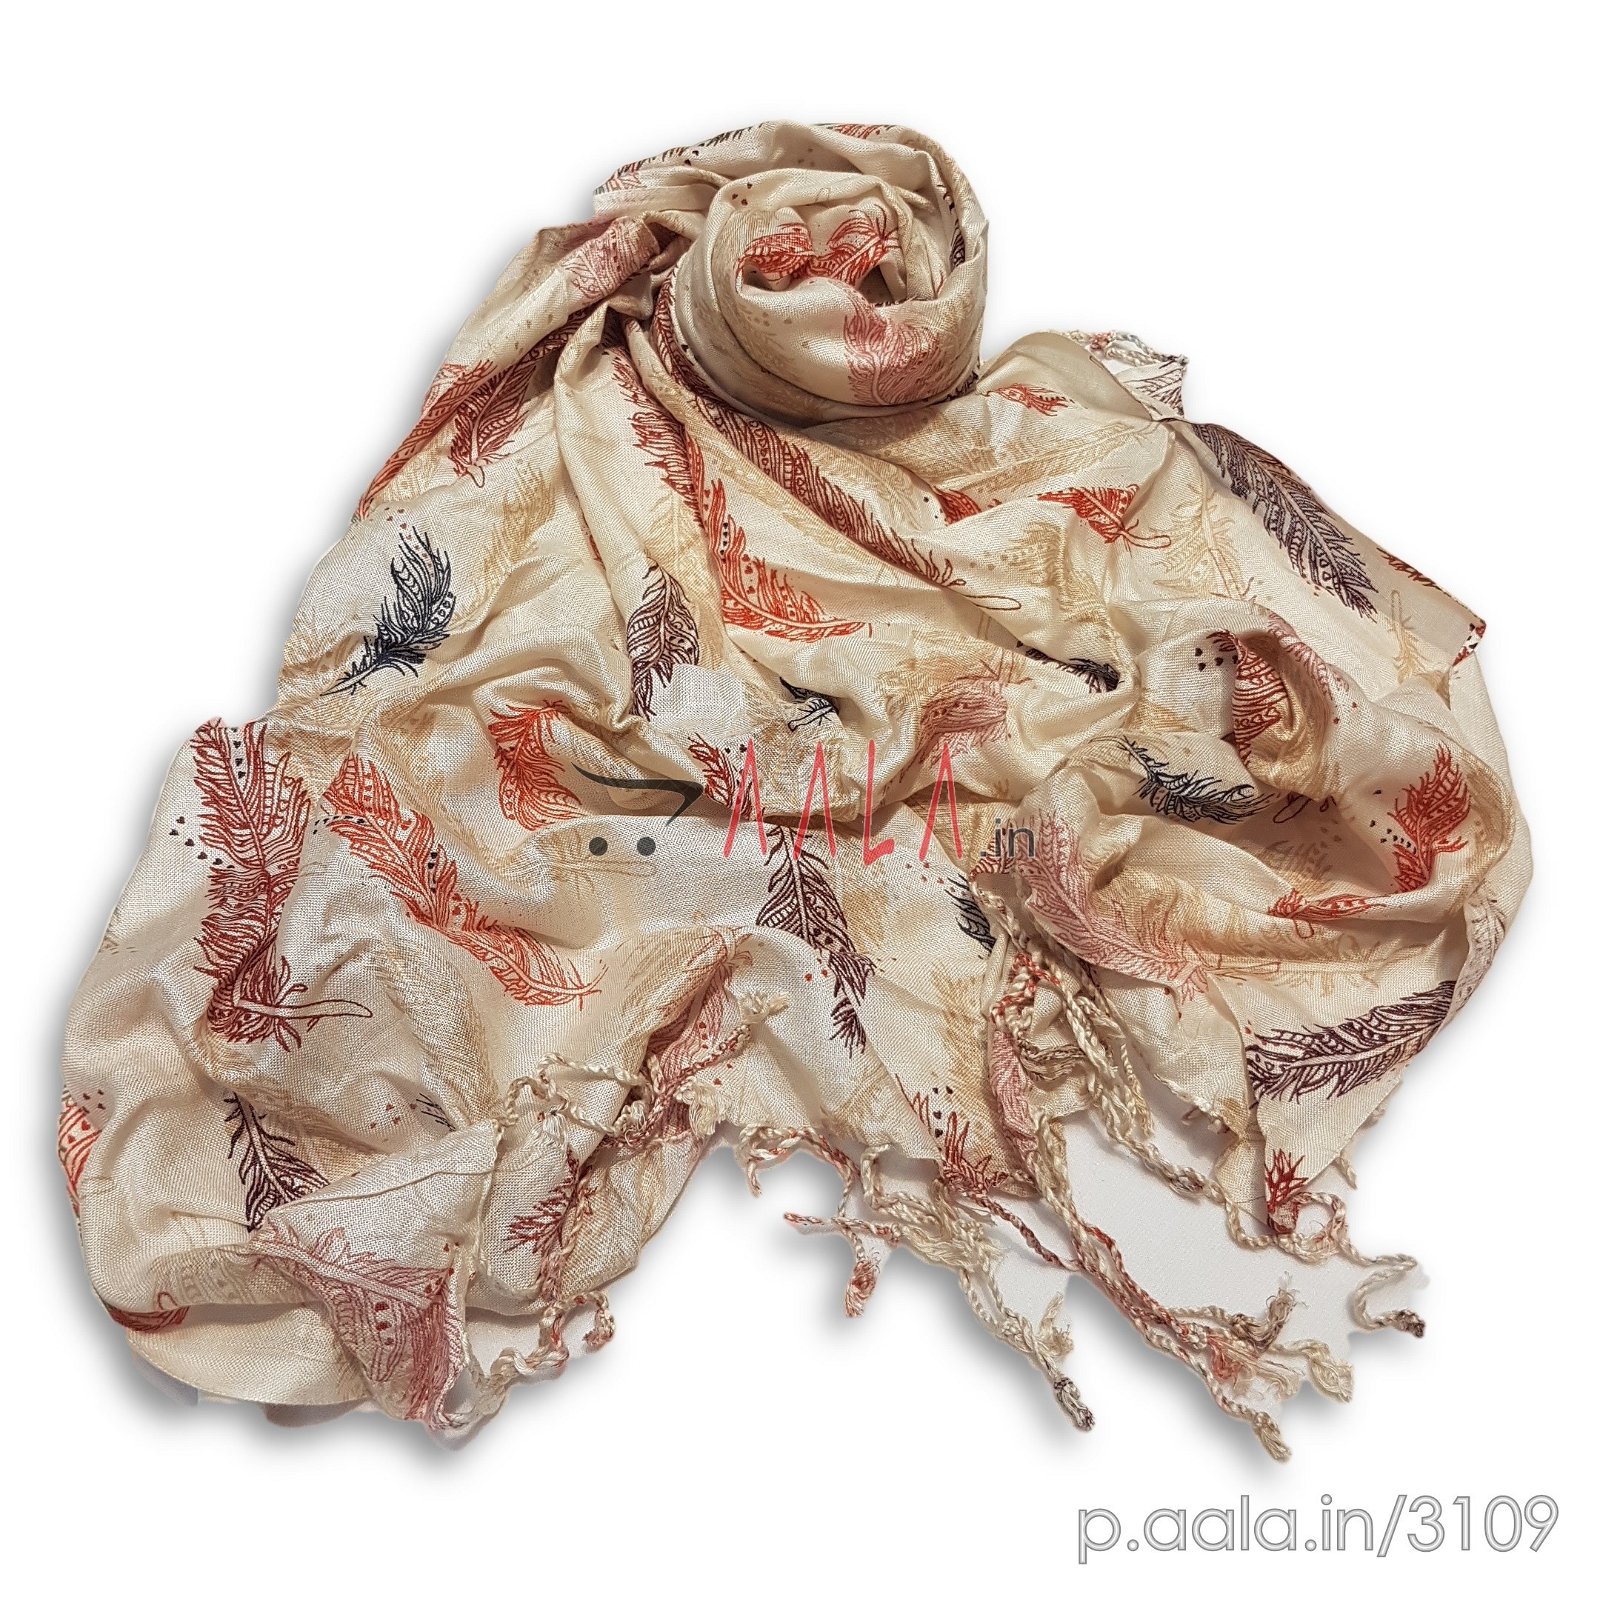 Printed Pashmina Stole 22 Inches Dyed 2.25 Metres #3109